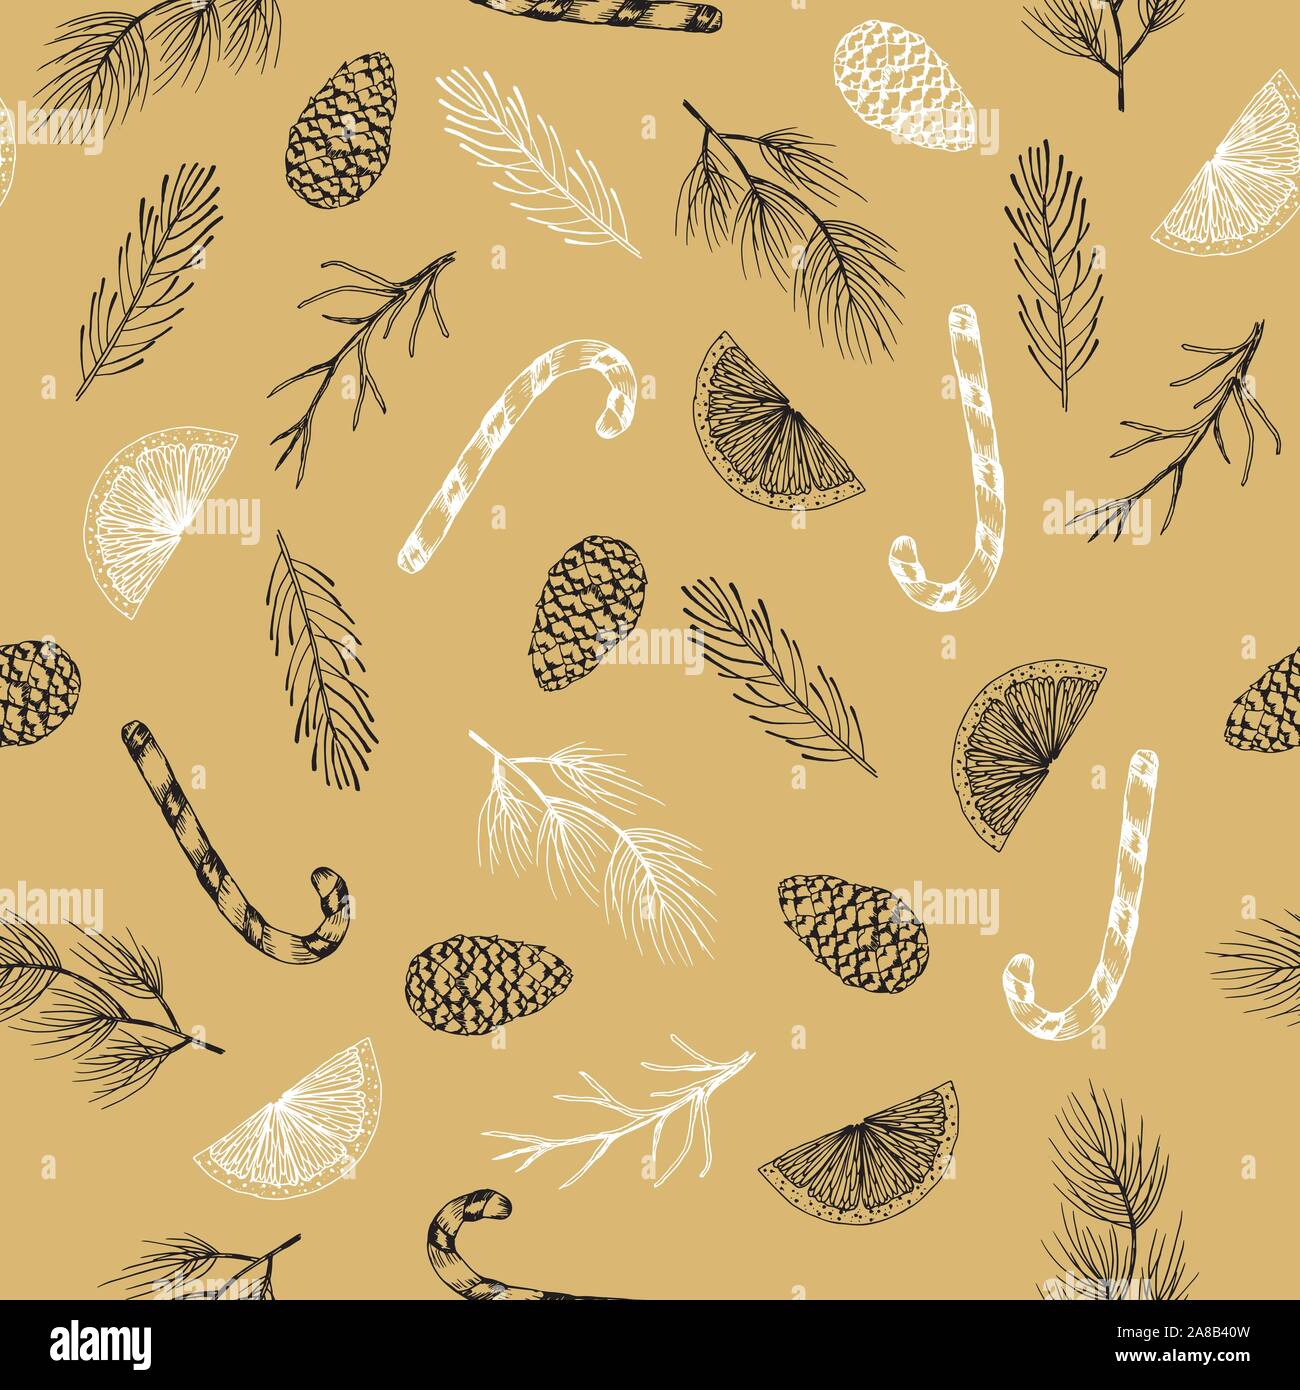 Christmas Seamless pattern with Pine Branches, winter plants hand drawn art design vector illustration. Stock Vector